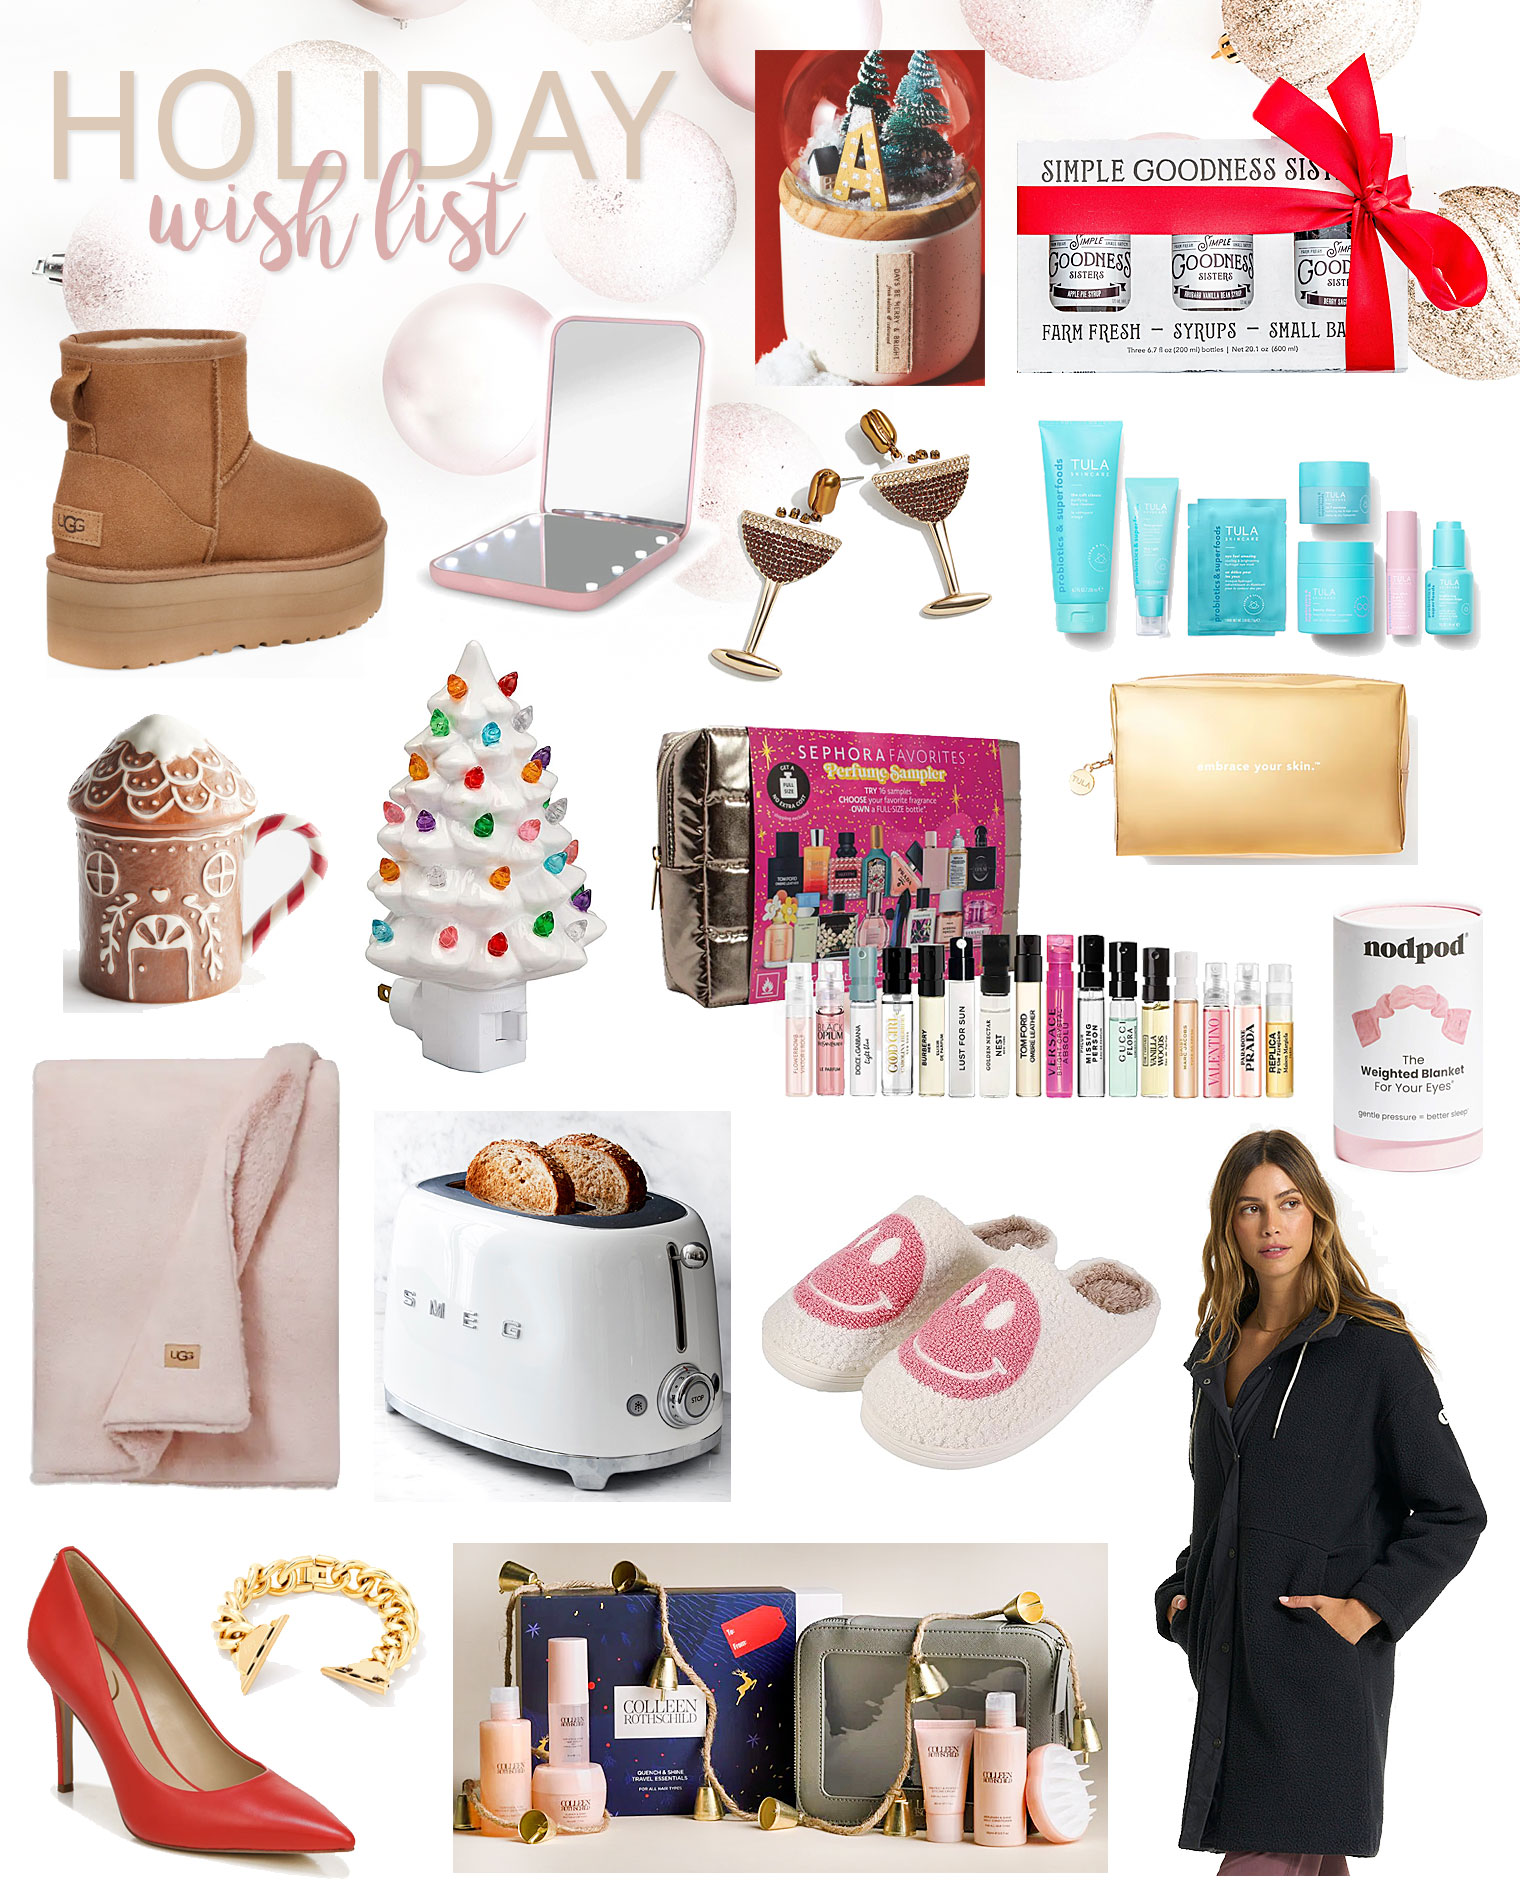 Christmas Gift Guide For Her - Hammersmith Broadway